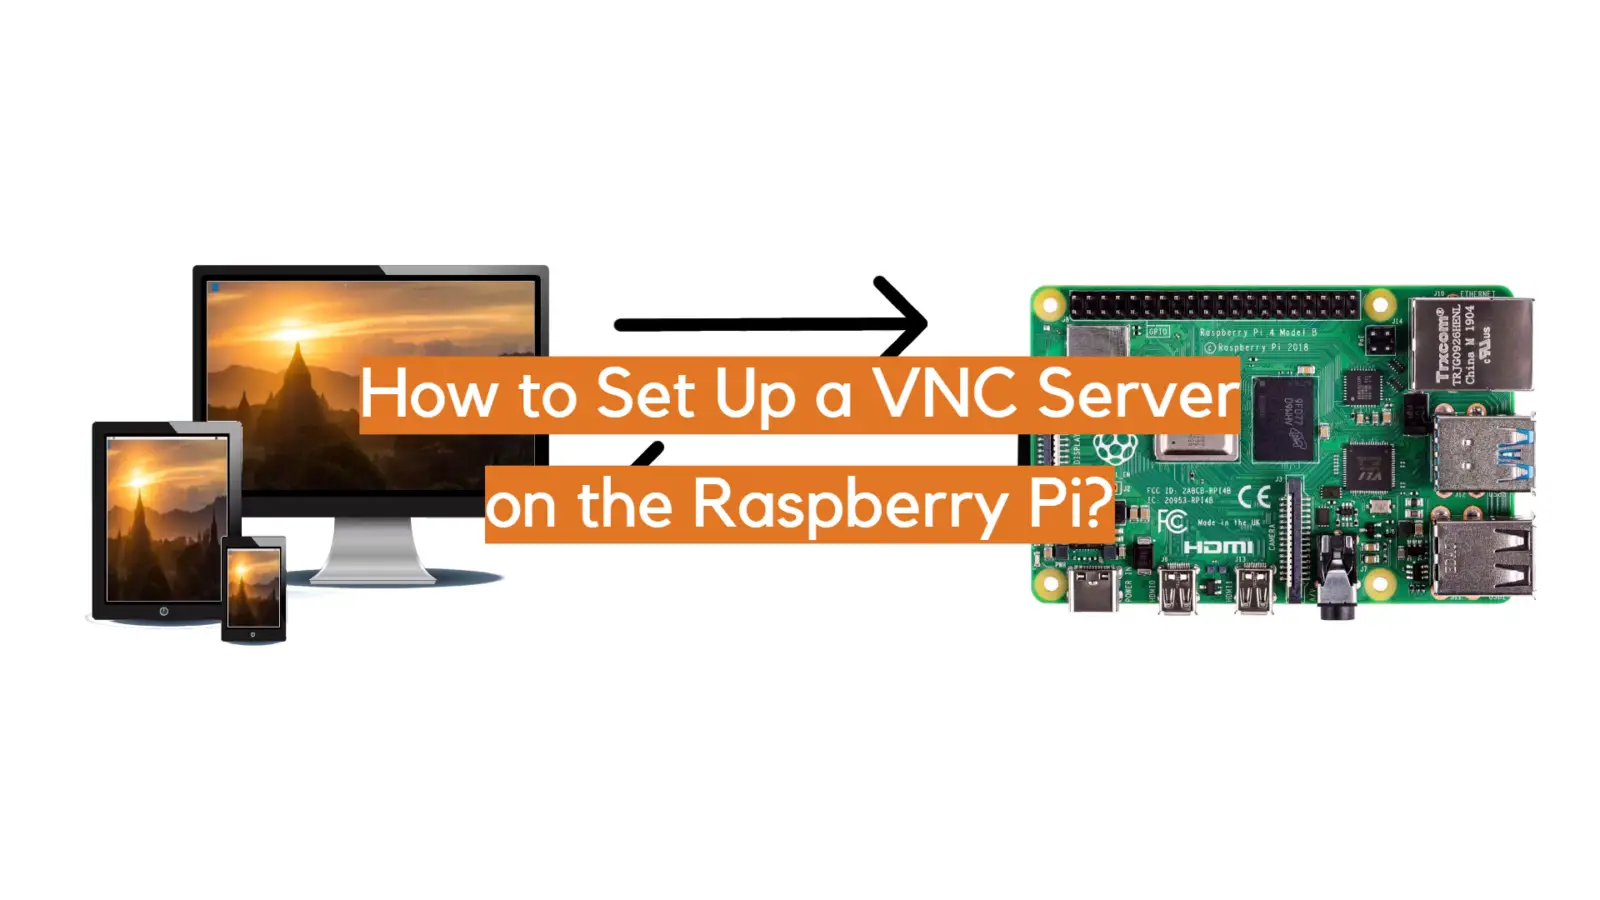 How to Set Up a VNC Server on the Raspberry Pi?